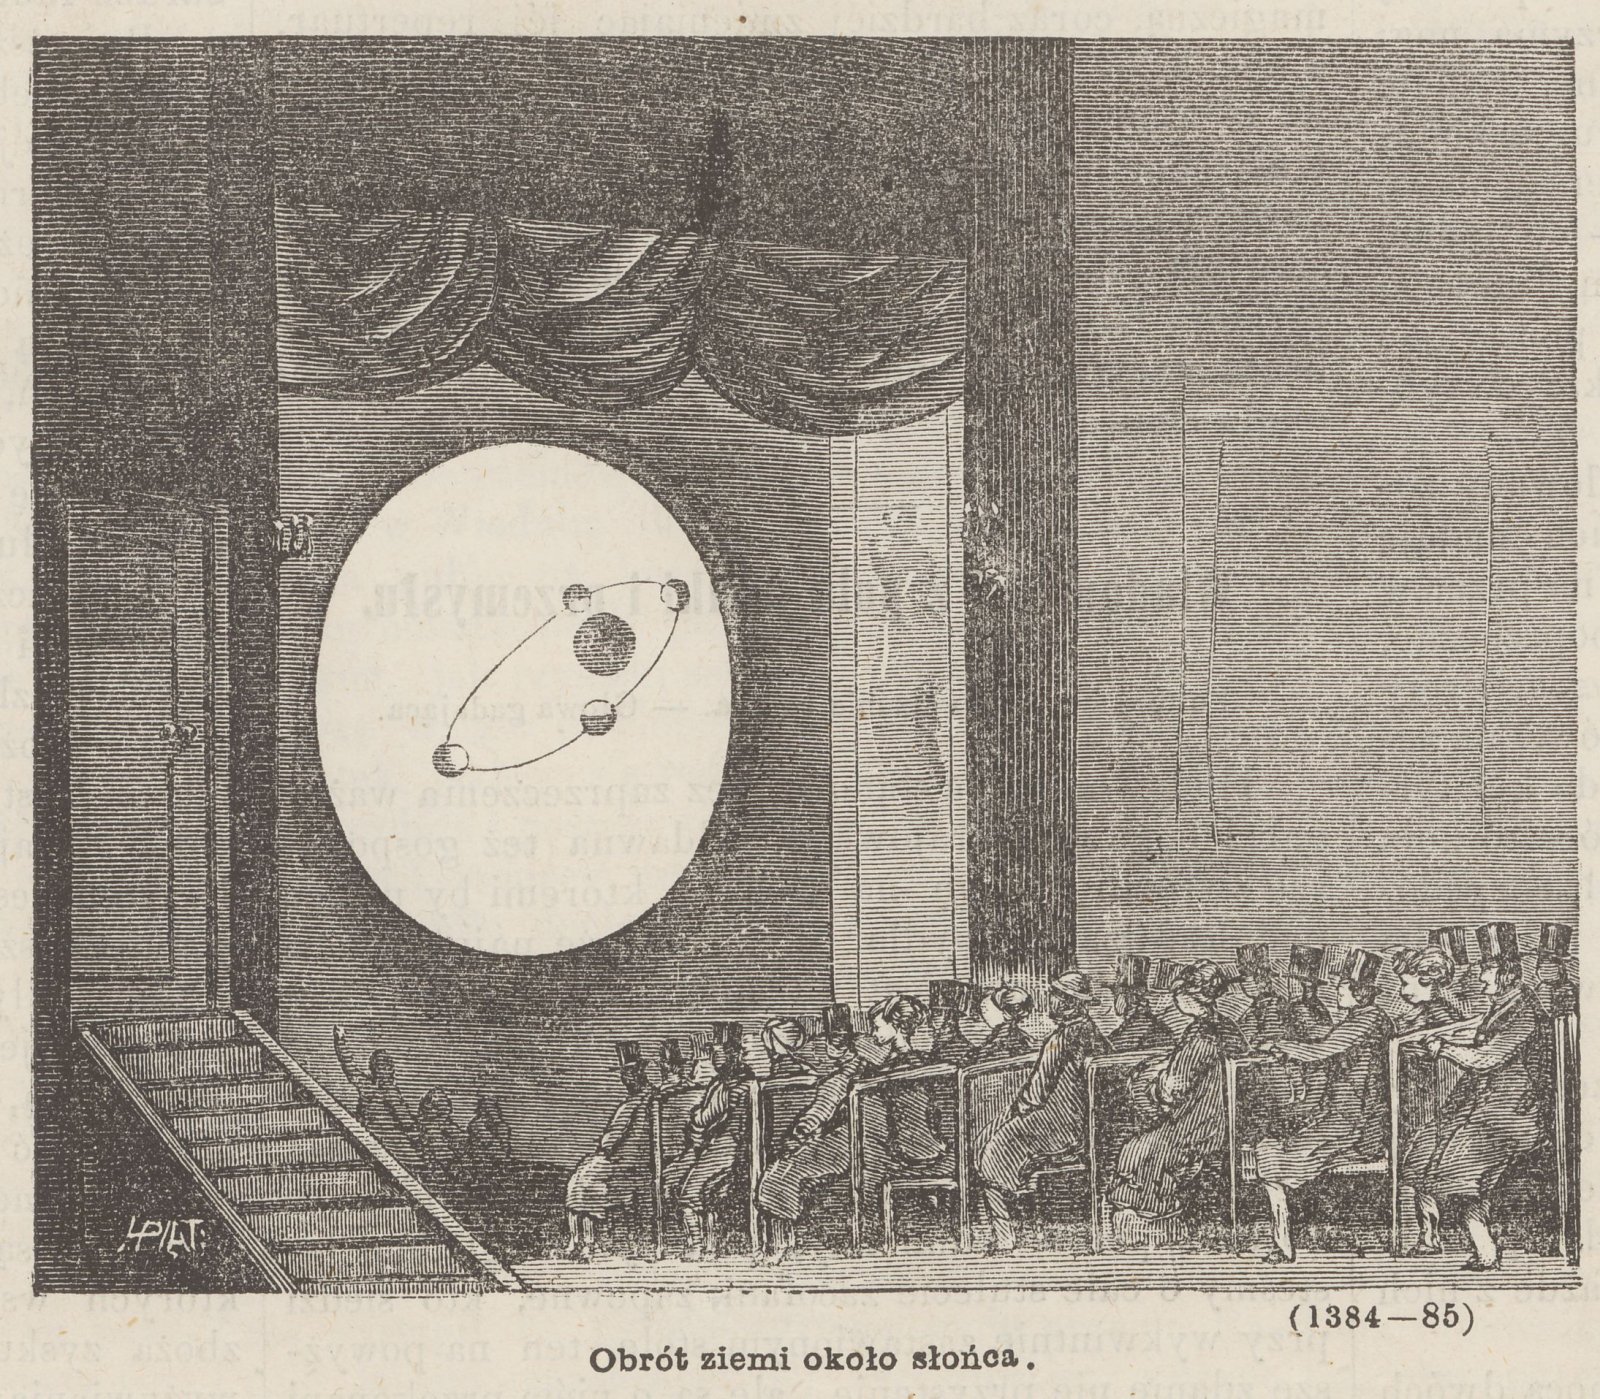 The revolution of the Earth around the Sun – a show of optical images by Mr Krosso, drawing in the “Kłosy” journal, 1869, issue 231, p. 341